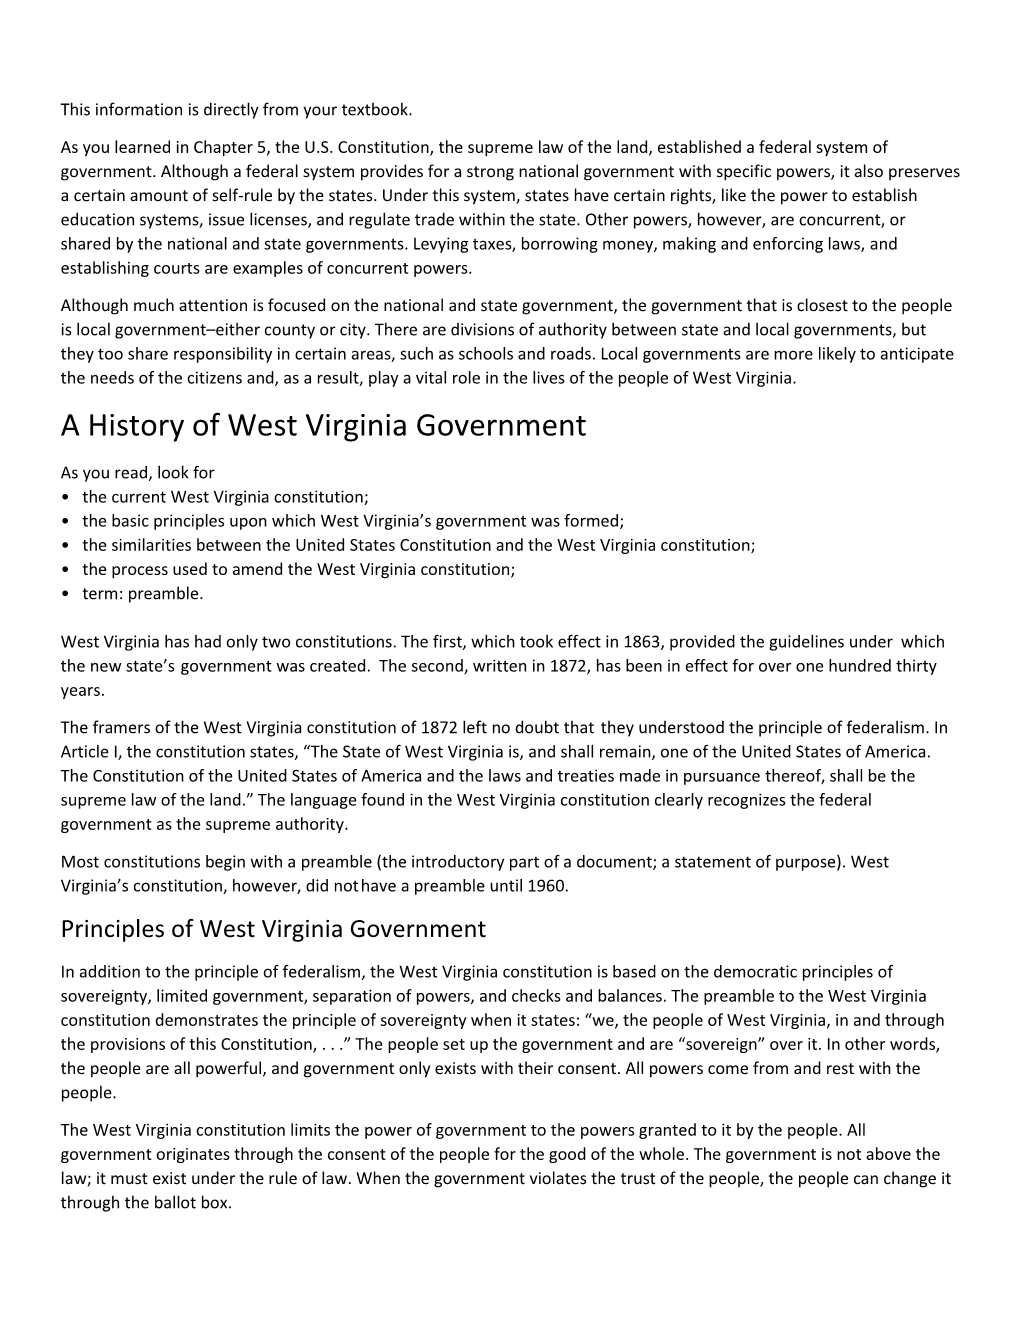 A History of West Virginia Government